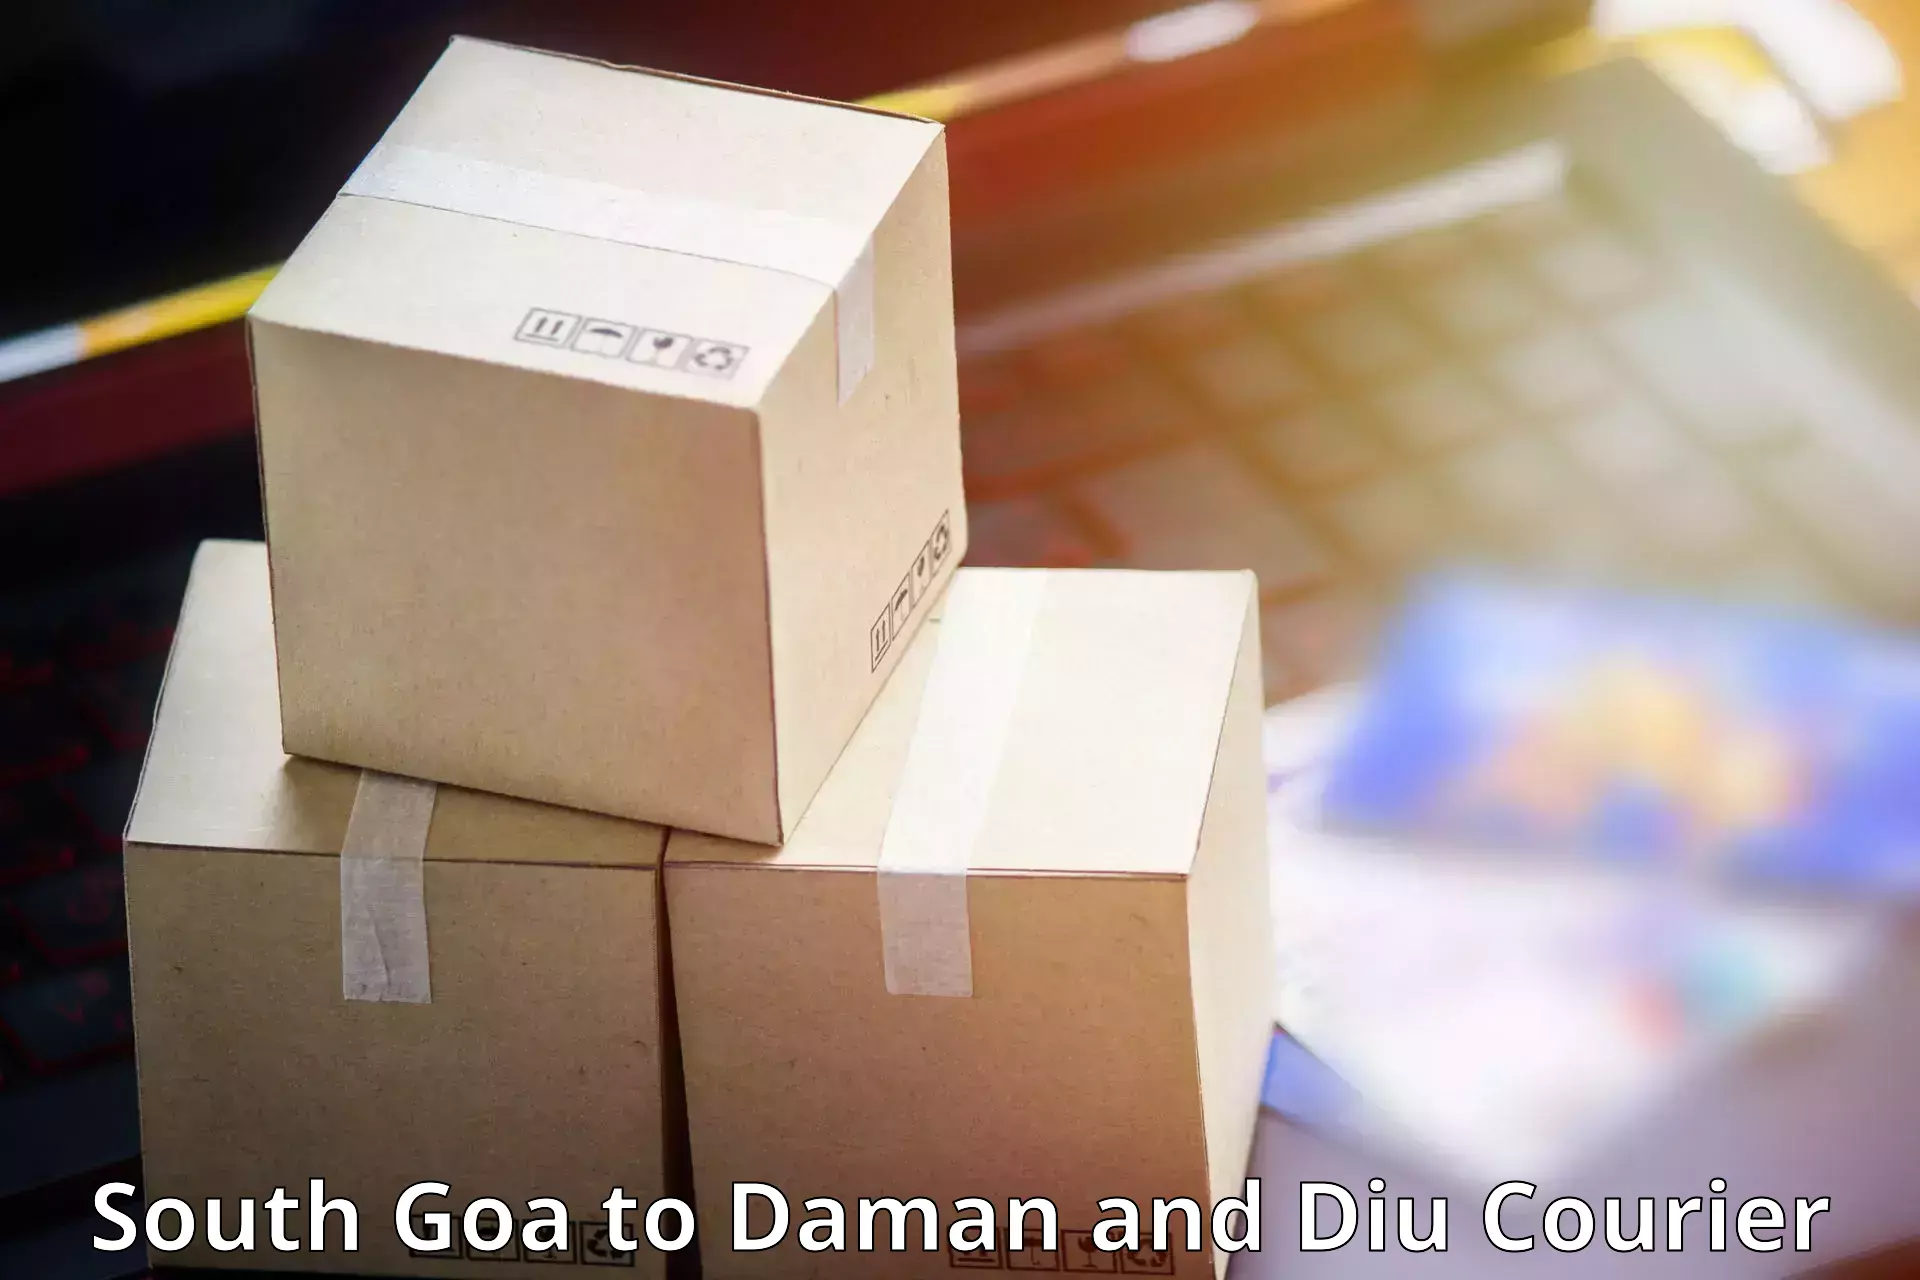 Fast shipping solutions South Goa to Daman and Diu